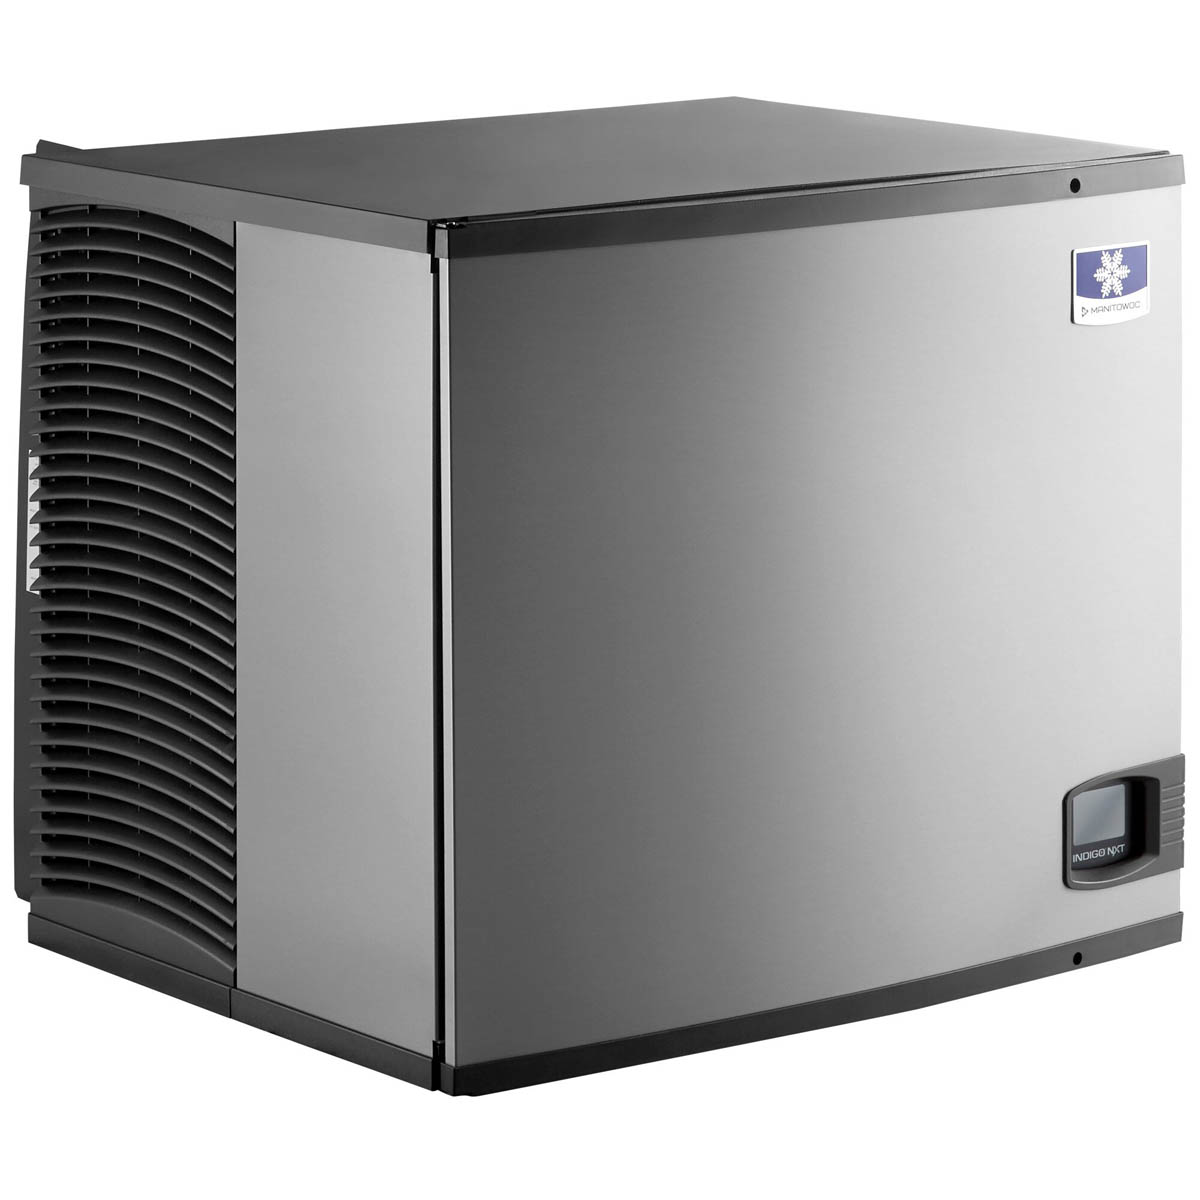 Manitowoc IYT0900A 30″ Cube-Style Indigo Nxt™ Series Ice Maker, Air-Cooled, 865 lbs/Day